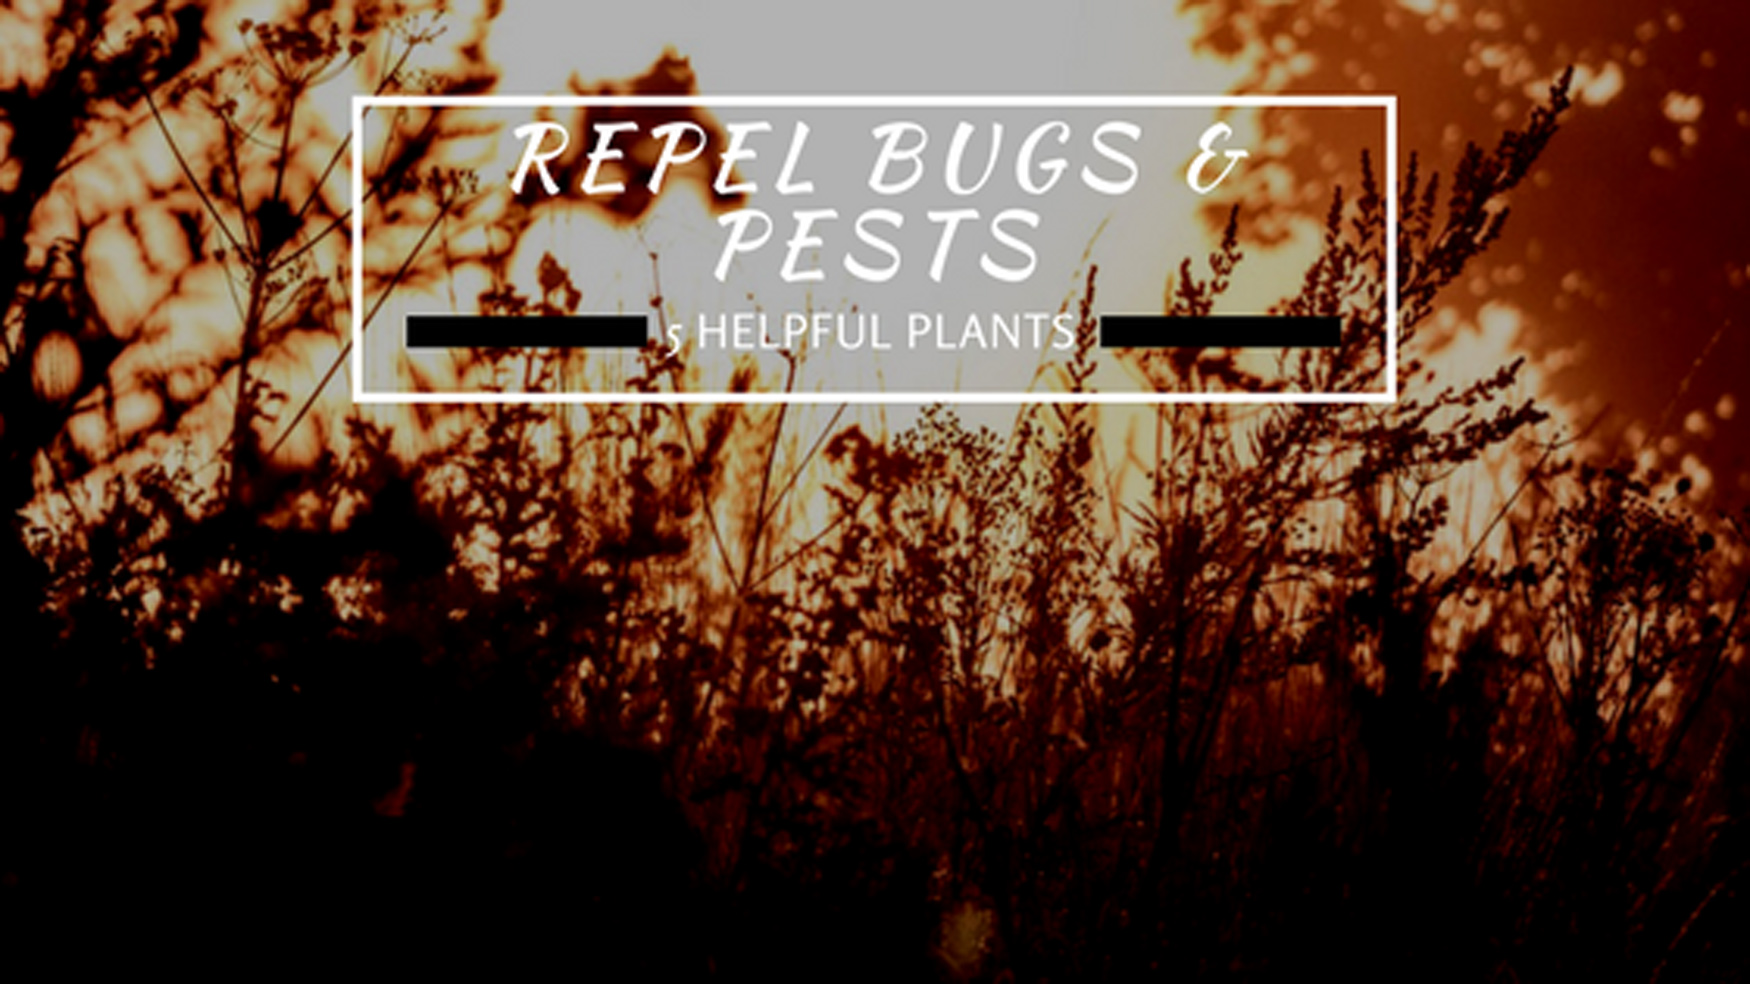 5 tips to repel pests and bugs